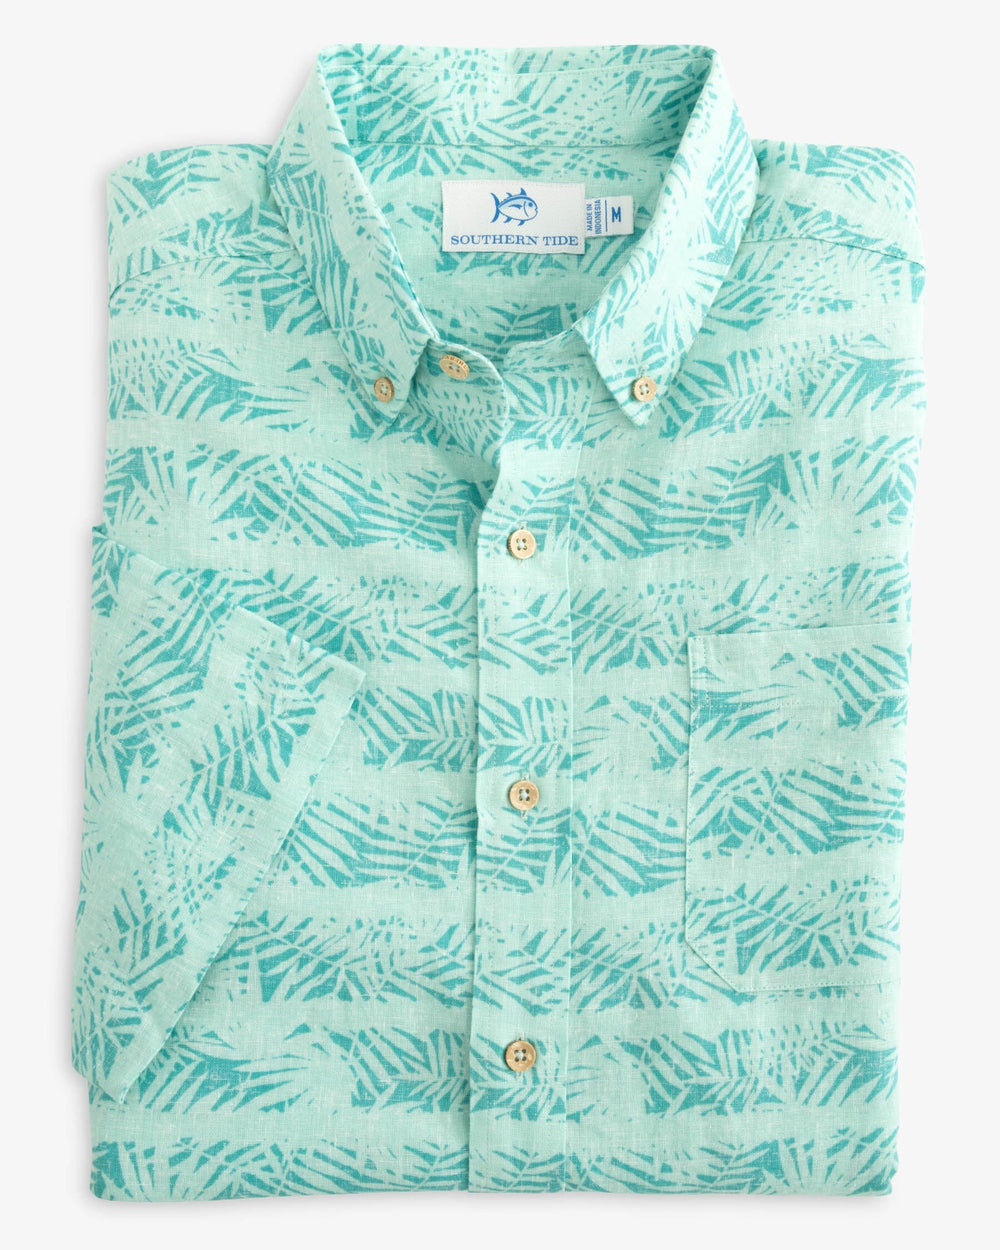 The folded view of the Southern Tide Palmy Stripe Short Sleeve Button Down Shirt by Southern Tide - Tidal Wave